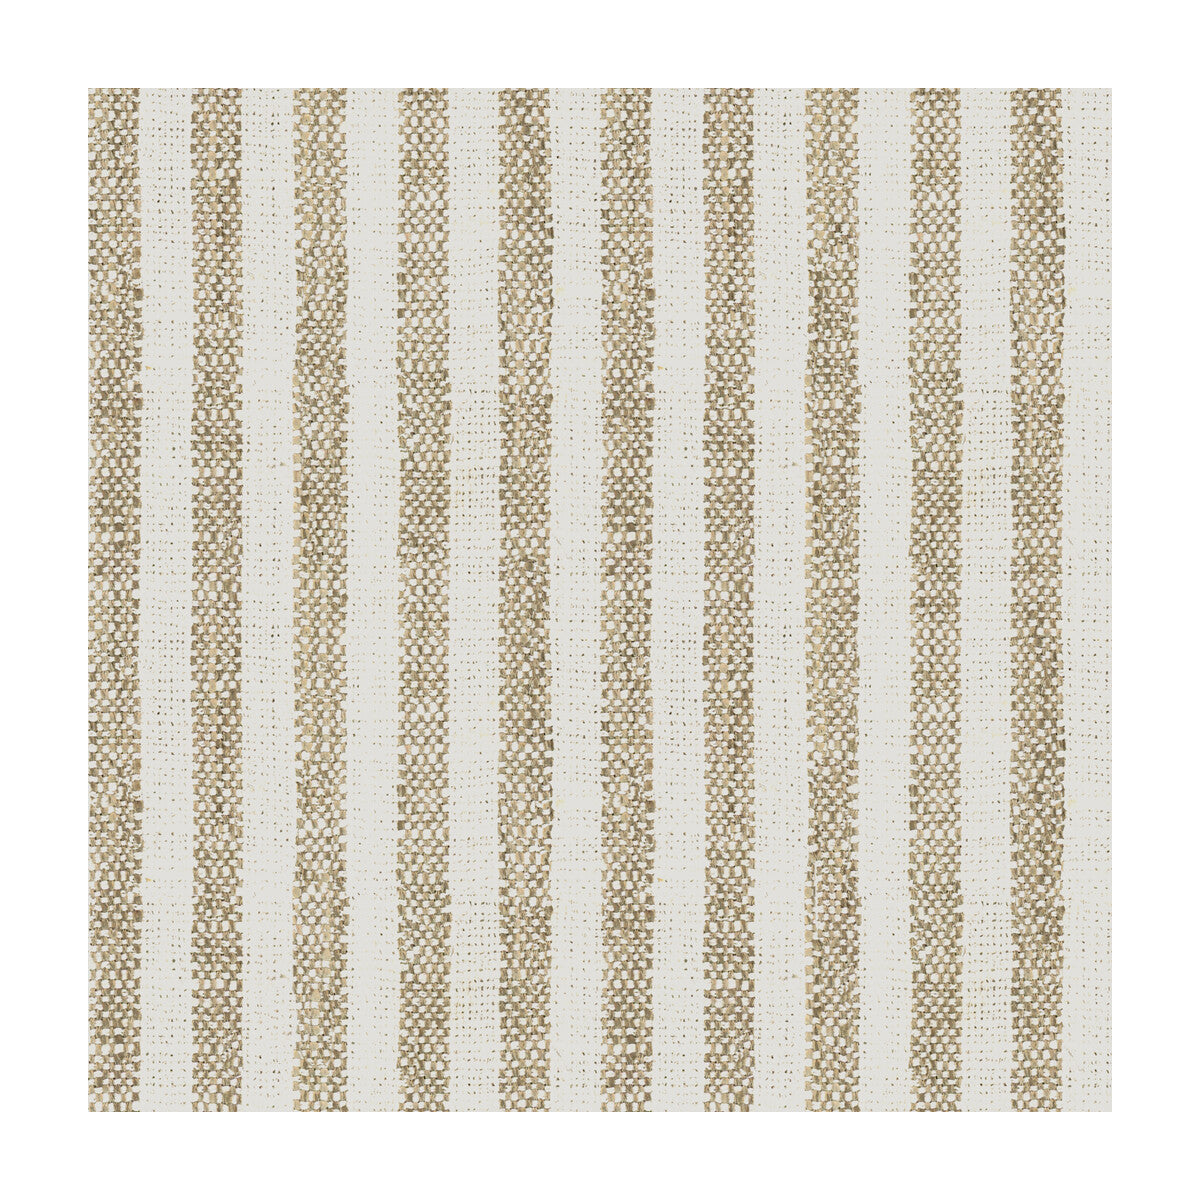 Kravet Basics fabric in 34080-11 color - pattern 34080.11.0 - by Kravet Basics in the Bungalow Chic II collection